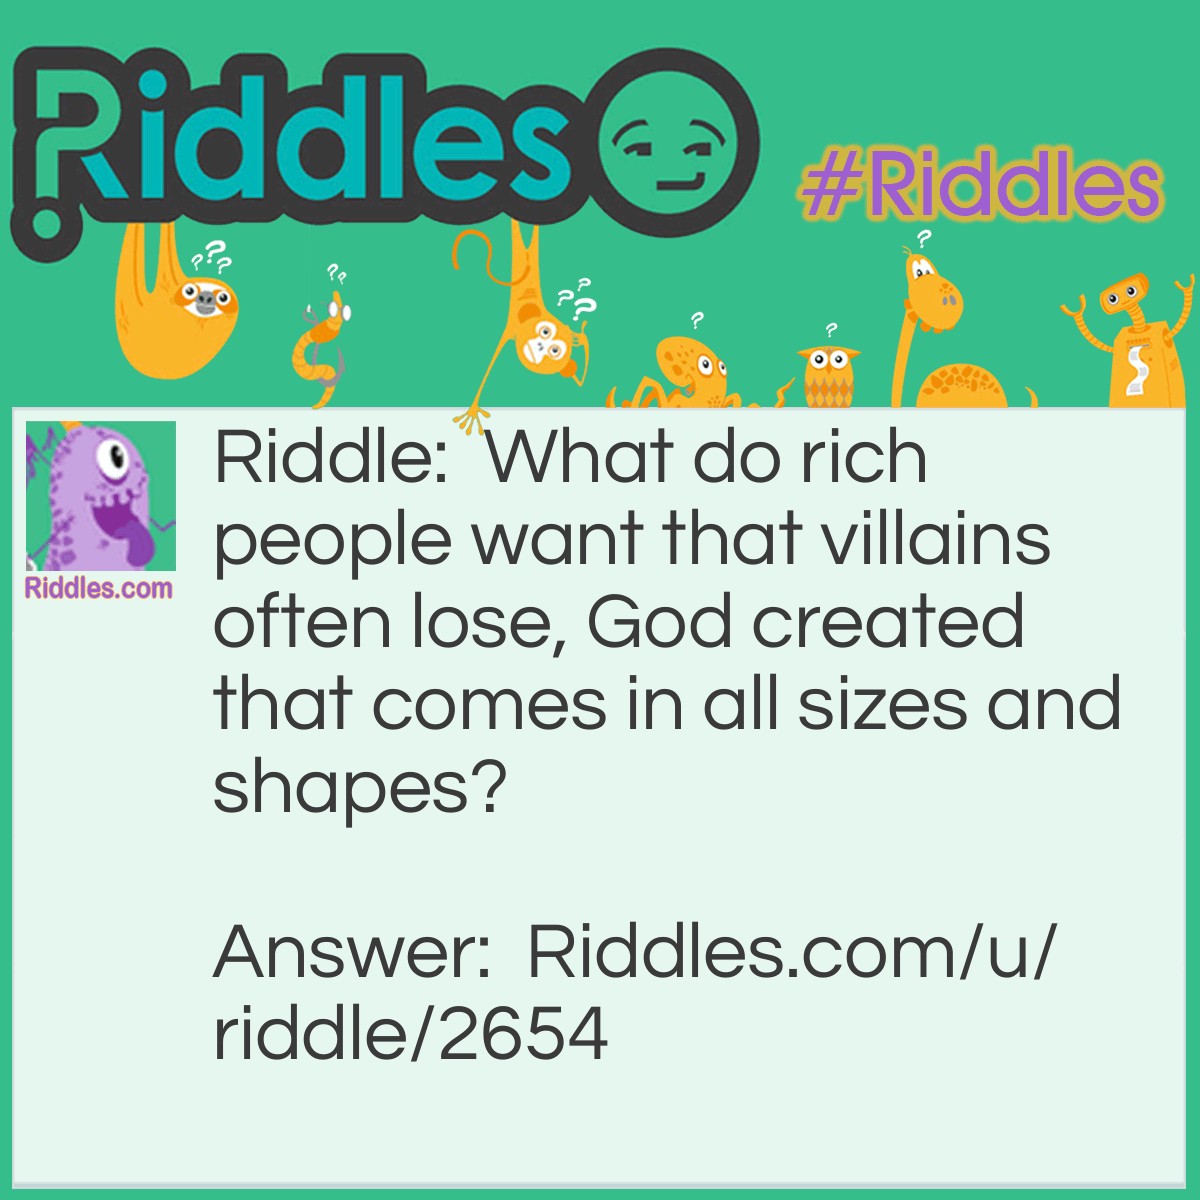 Riddle: What do rich people want that villains often lose, God created that comes in all sizes and shapes? Answer: Everything.